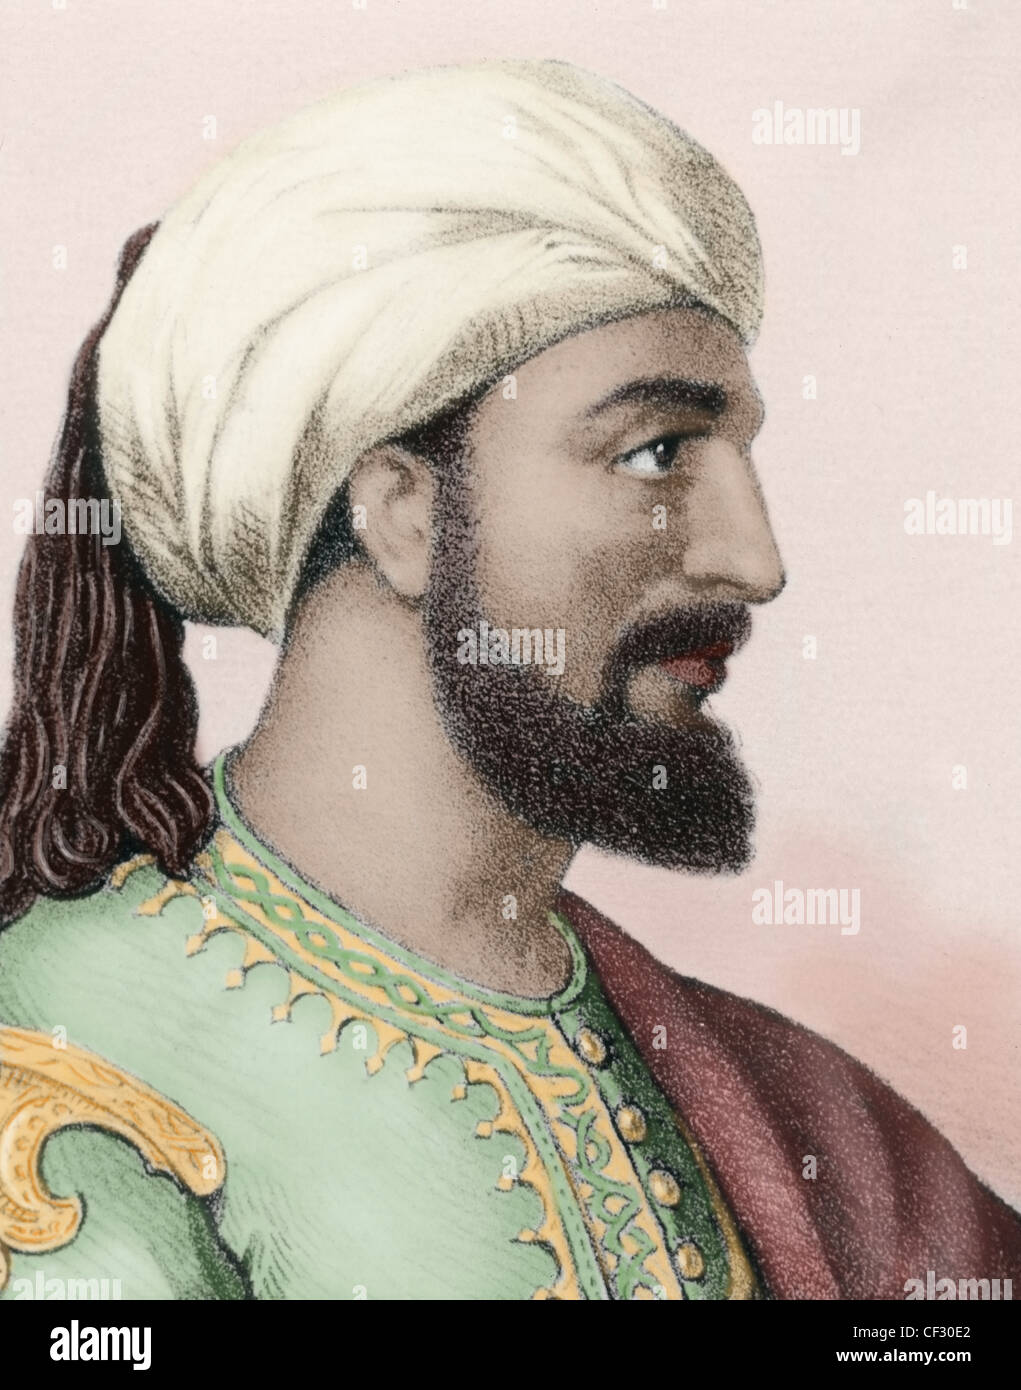 Abd-ar-Rahman III (889- 961). Emir and Caliph of Al-Andalus. Portrait. Colored engraving. 19th century. Stock Photo